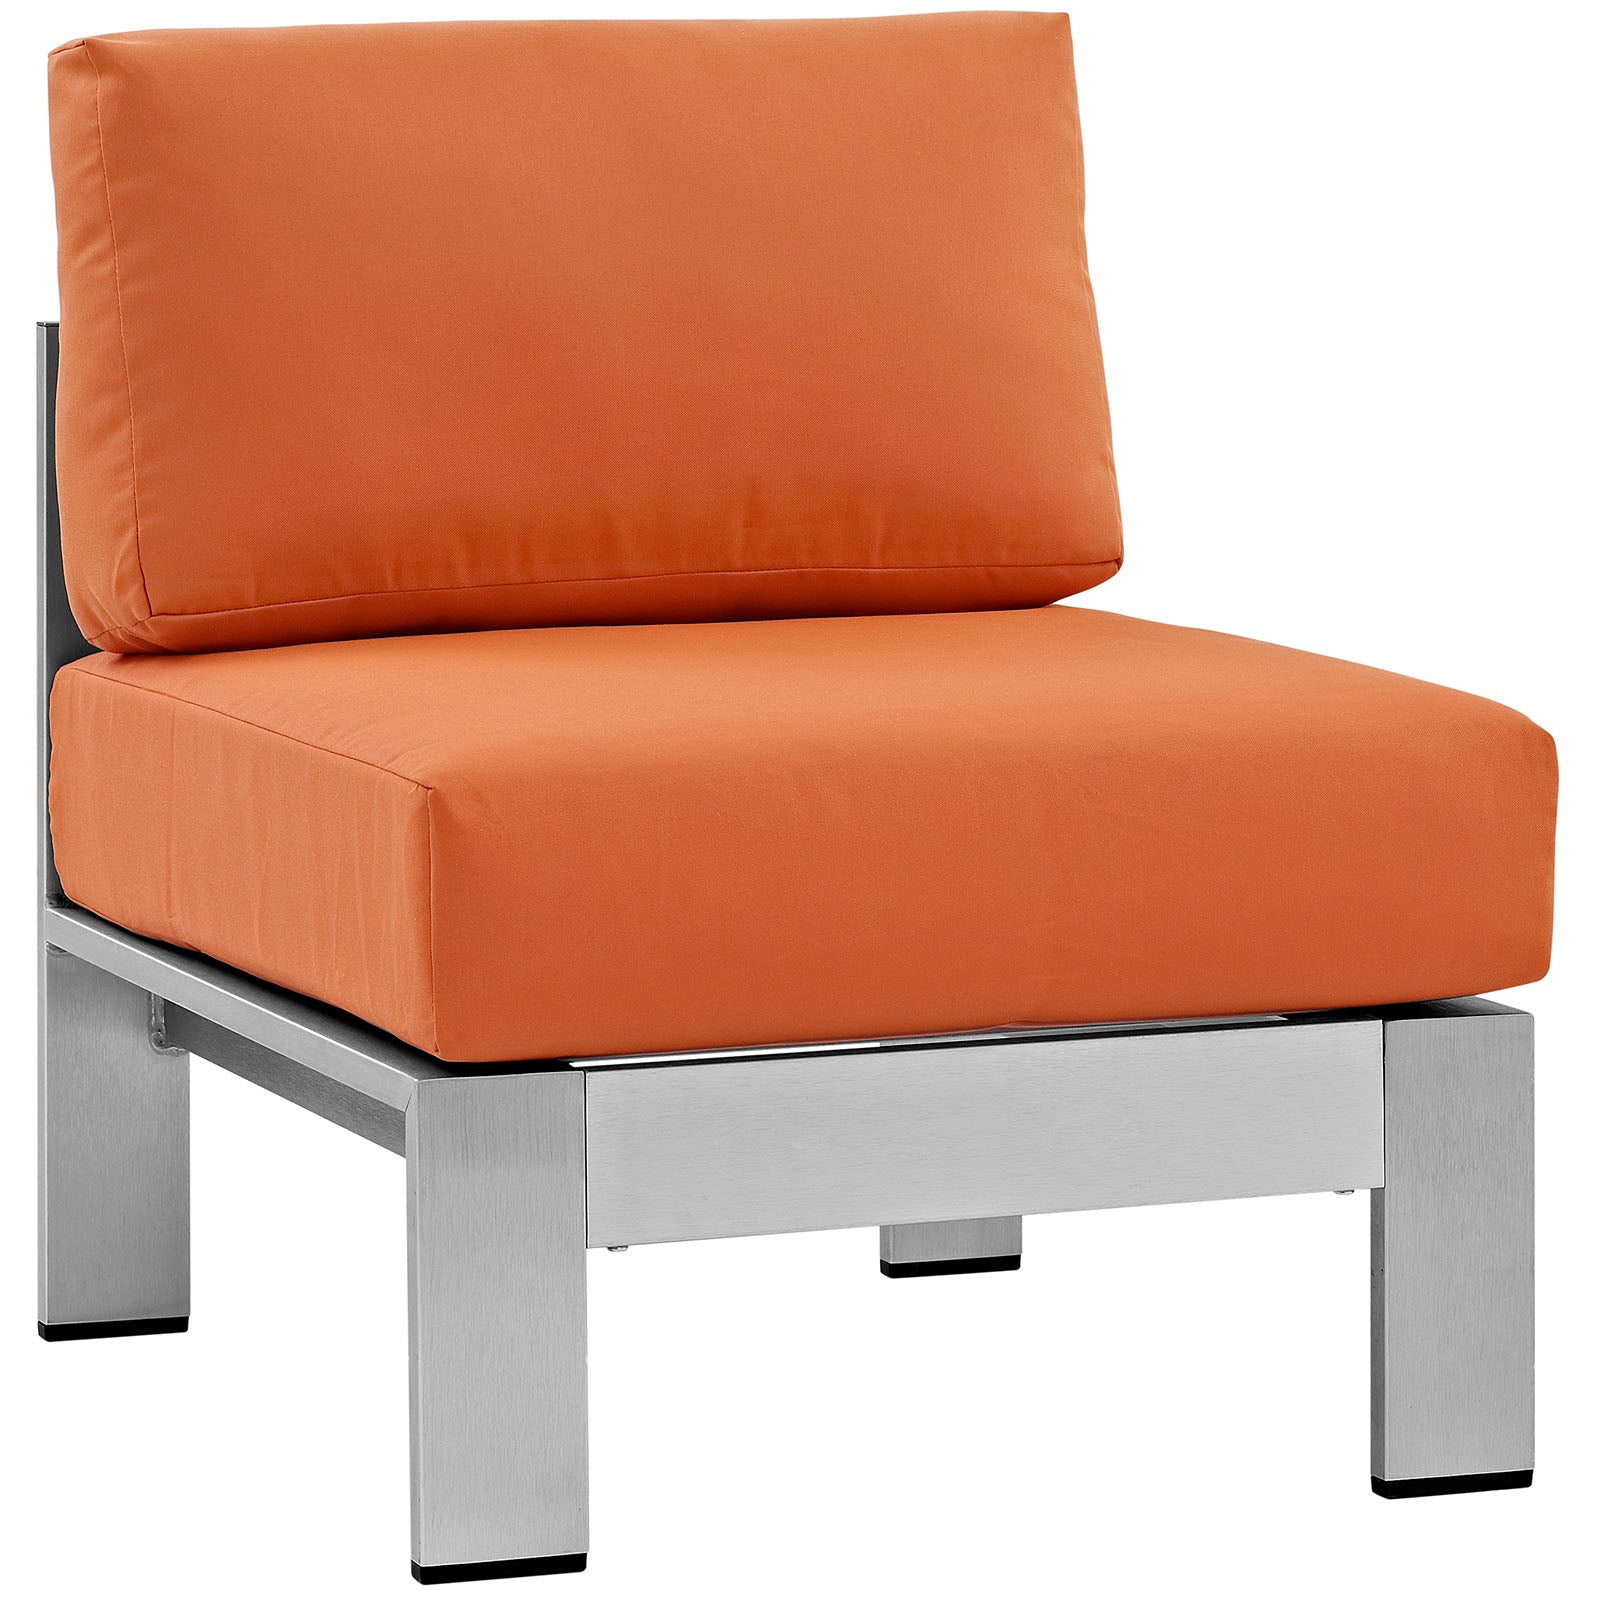 Modway Outdoor Chairs - Shore Armless Outdoor Patio Aluminum Chair Silver Orange